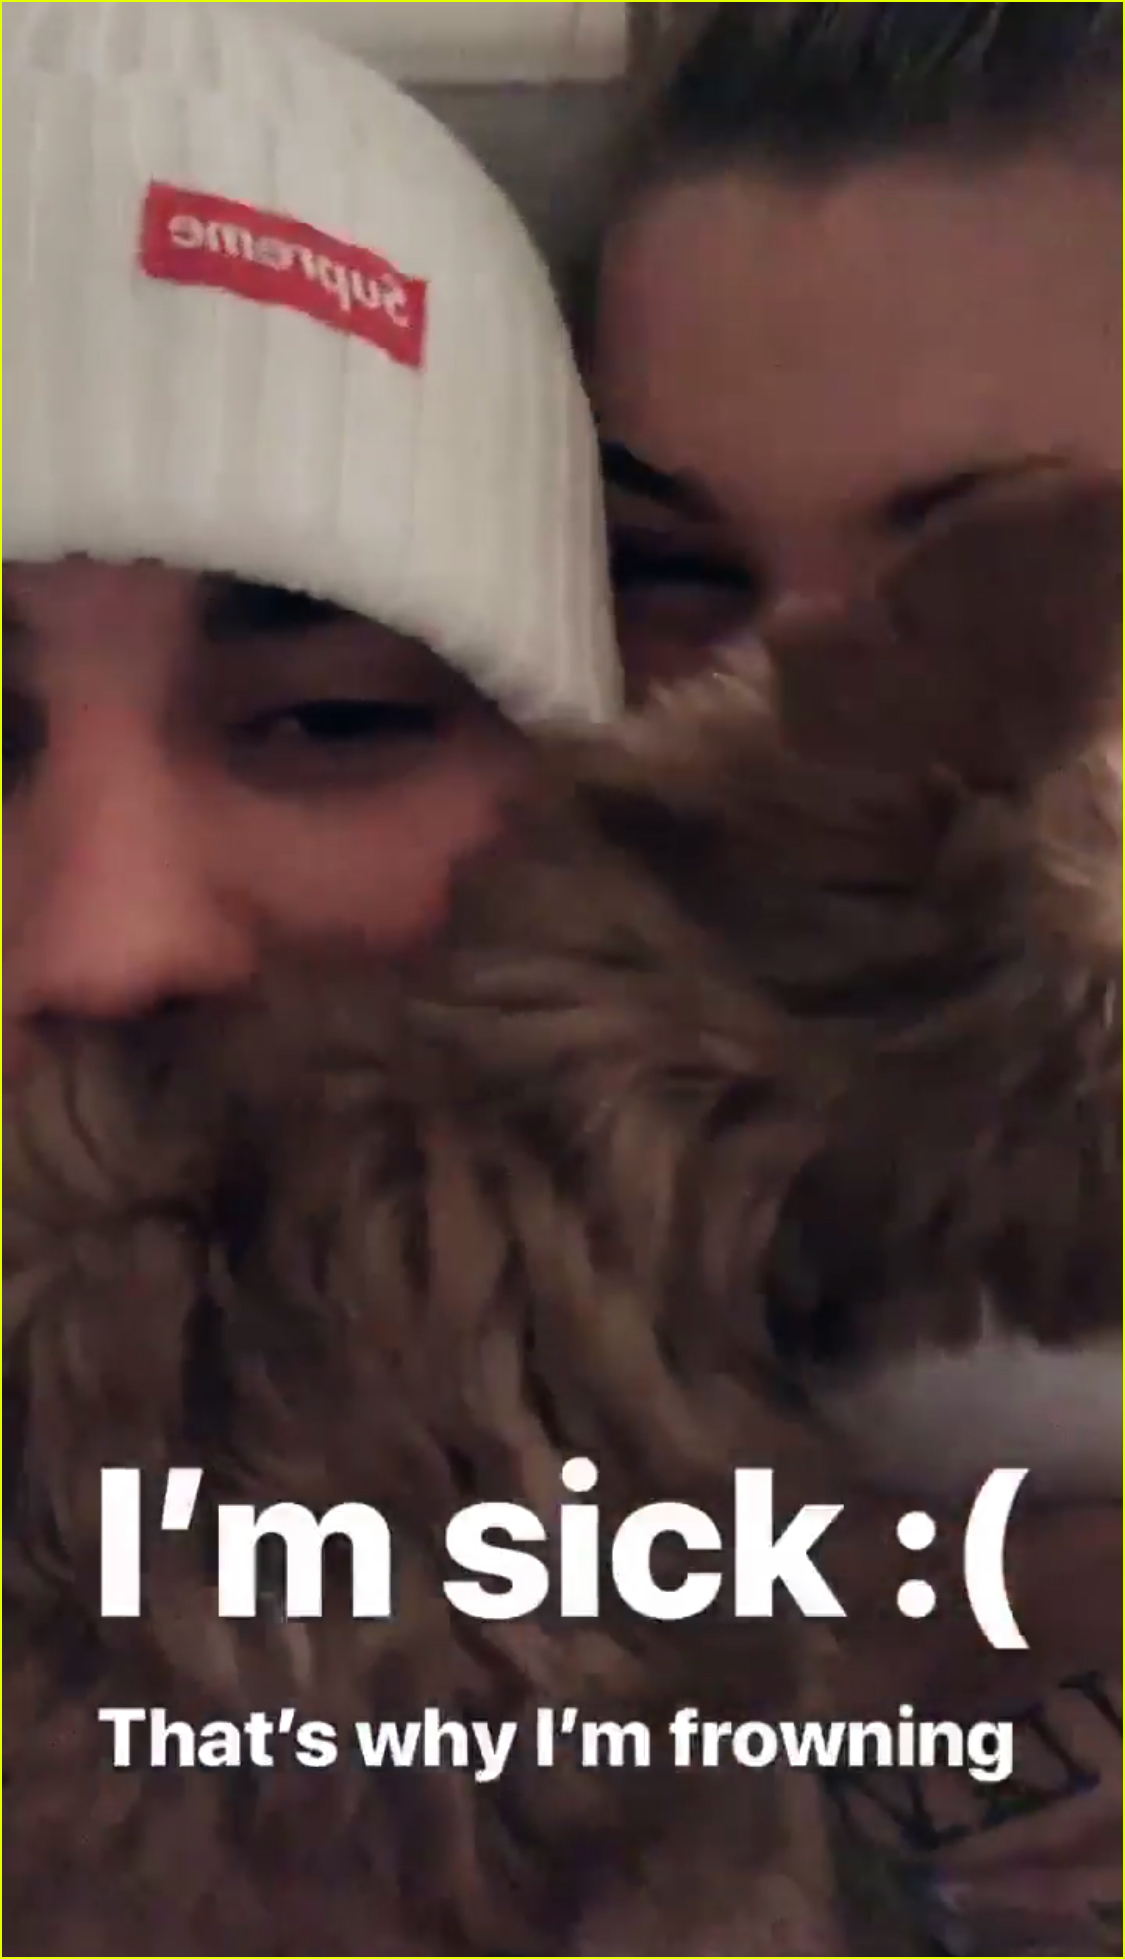 justin hailey bieber adopt adorable puppy for christmas 16